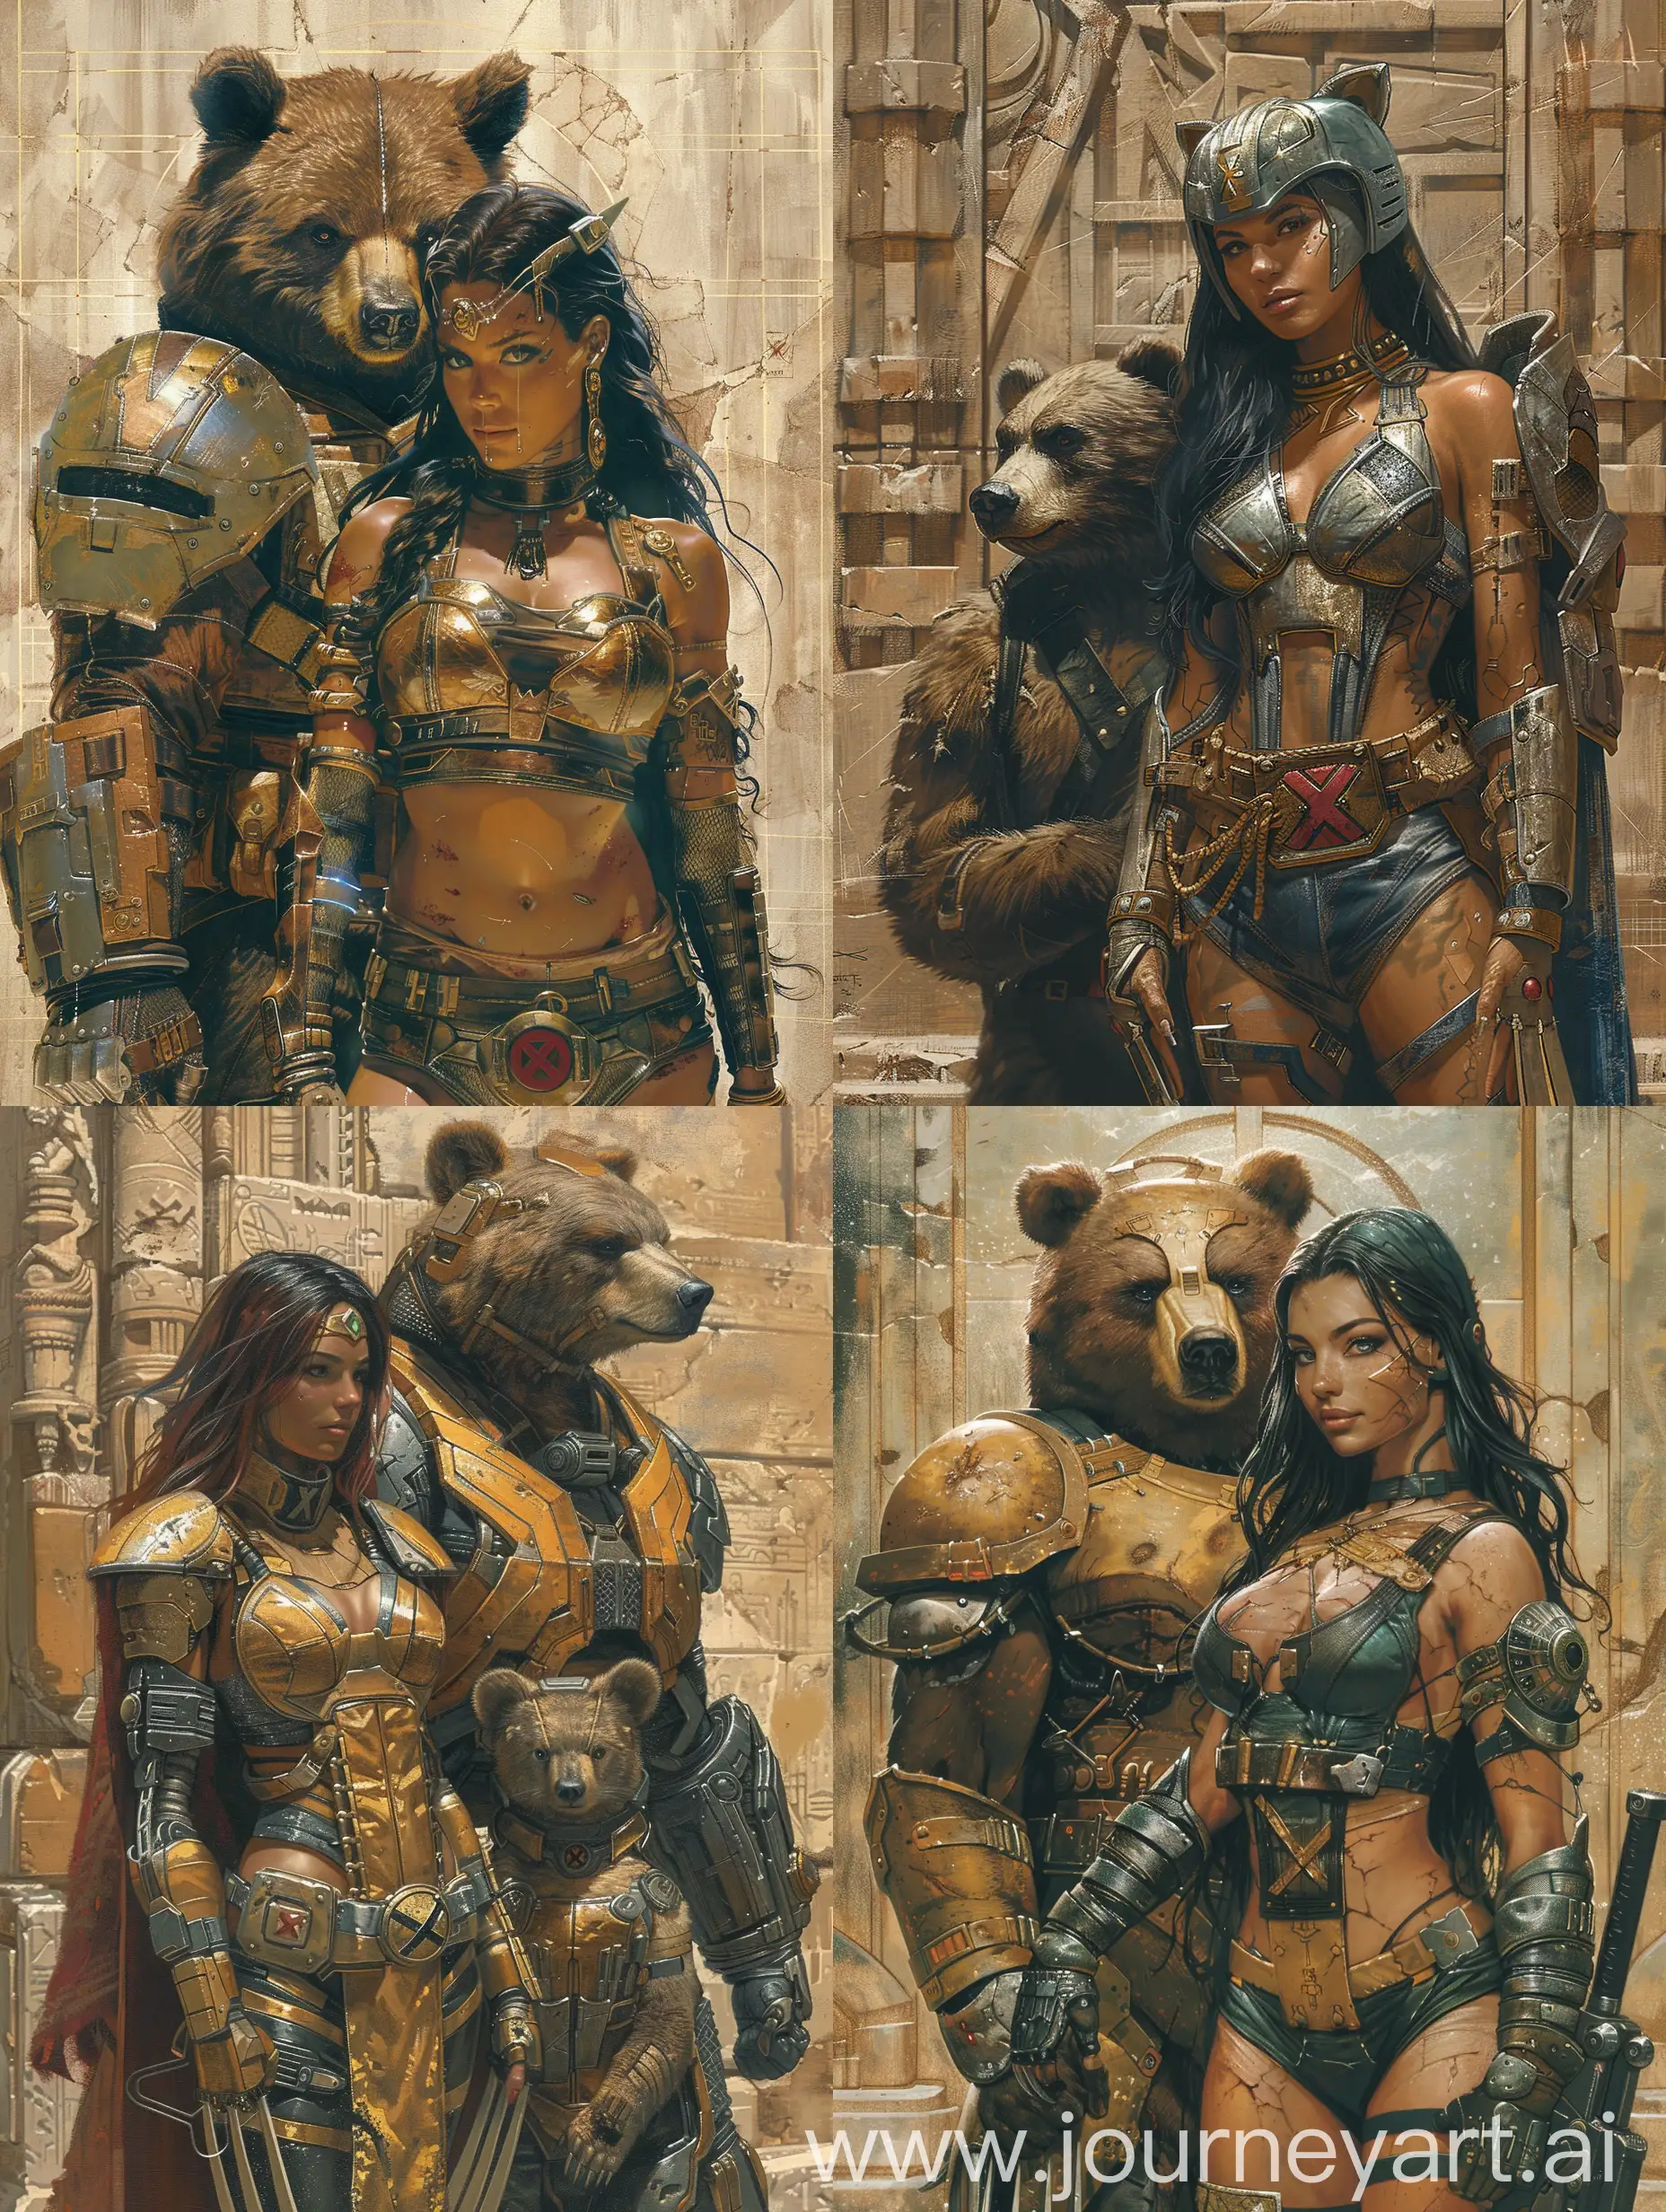 Exquisite-Women-Warrior-Amazon-with-Cyberbear-Bodyguard-in-Intricate-Armor-Jim-Lee-and-Luis-Royo-Style